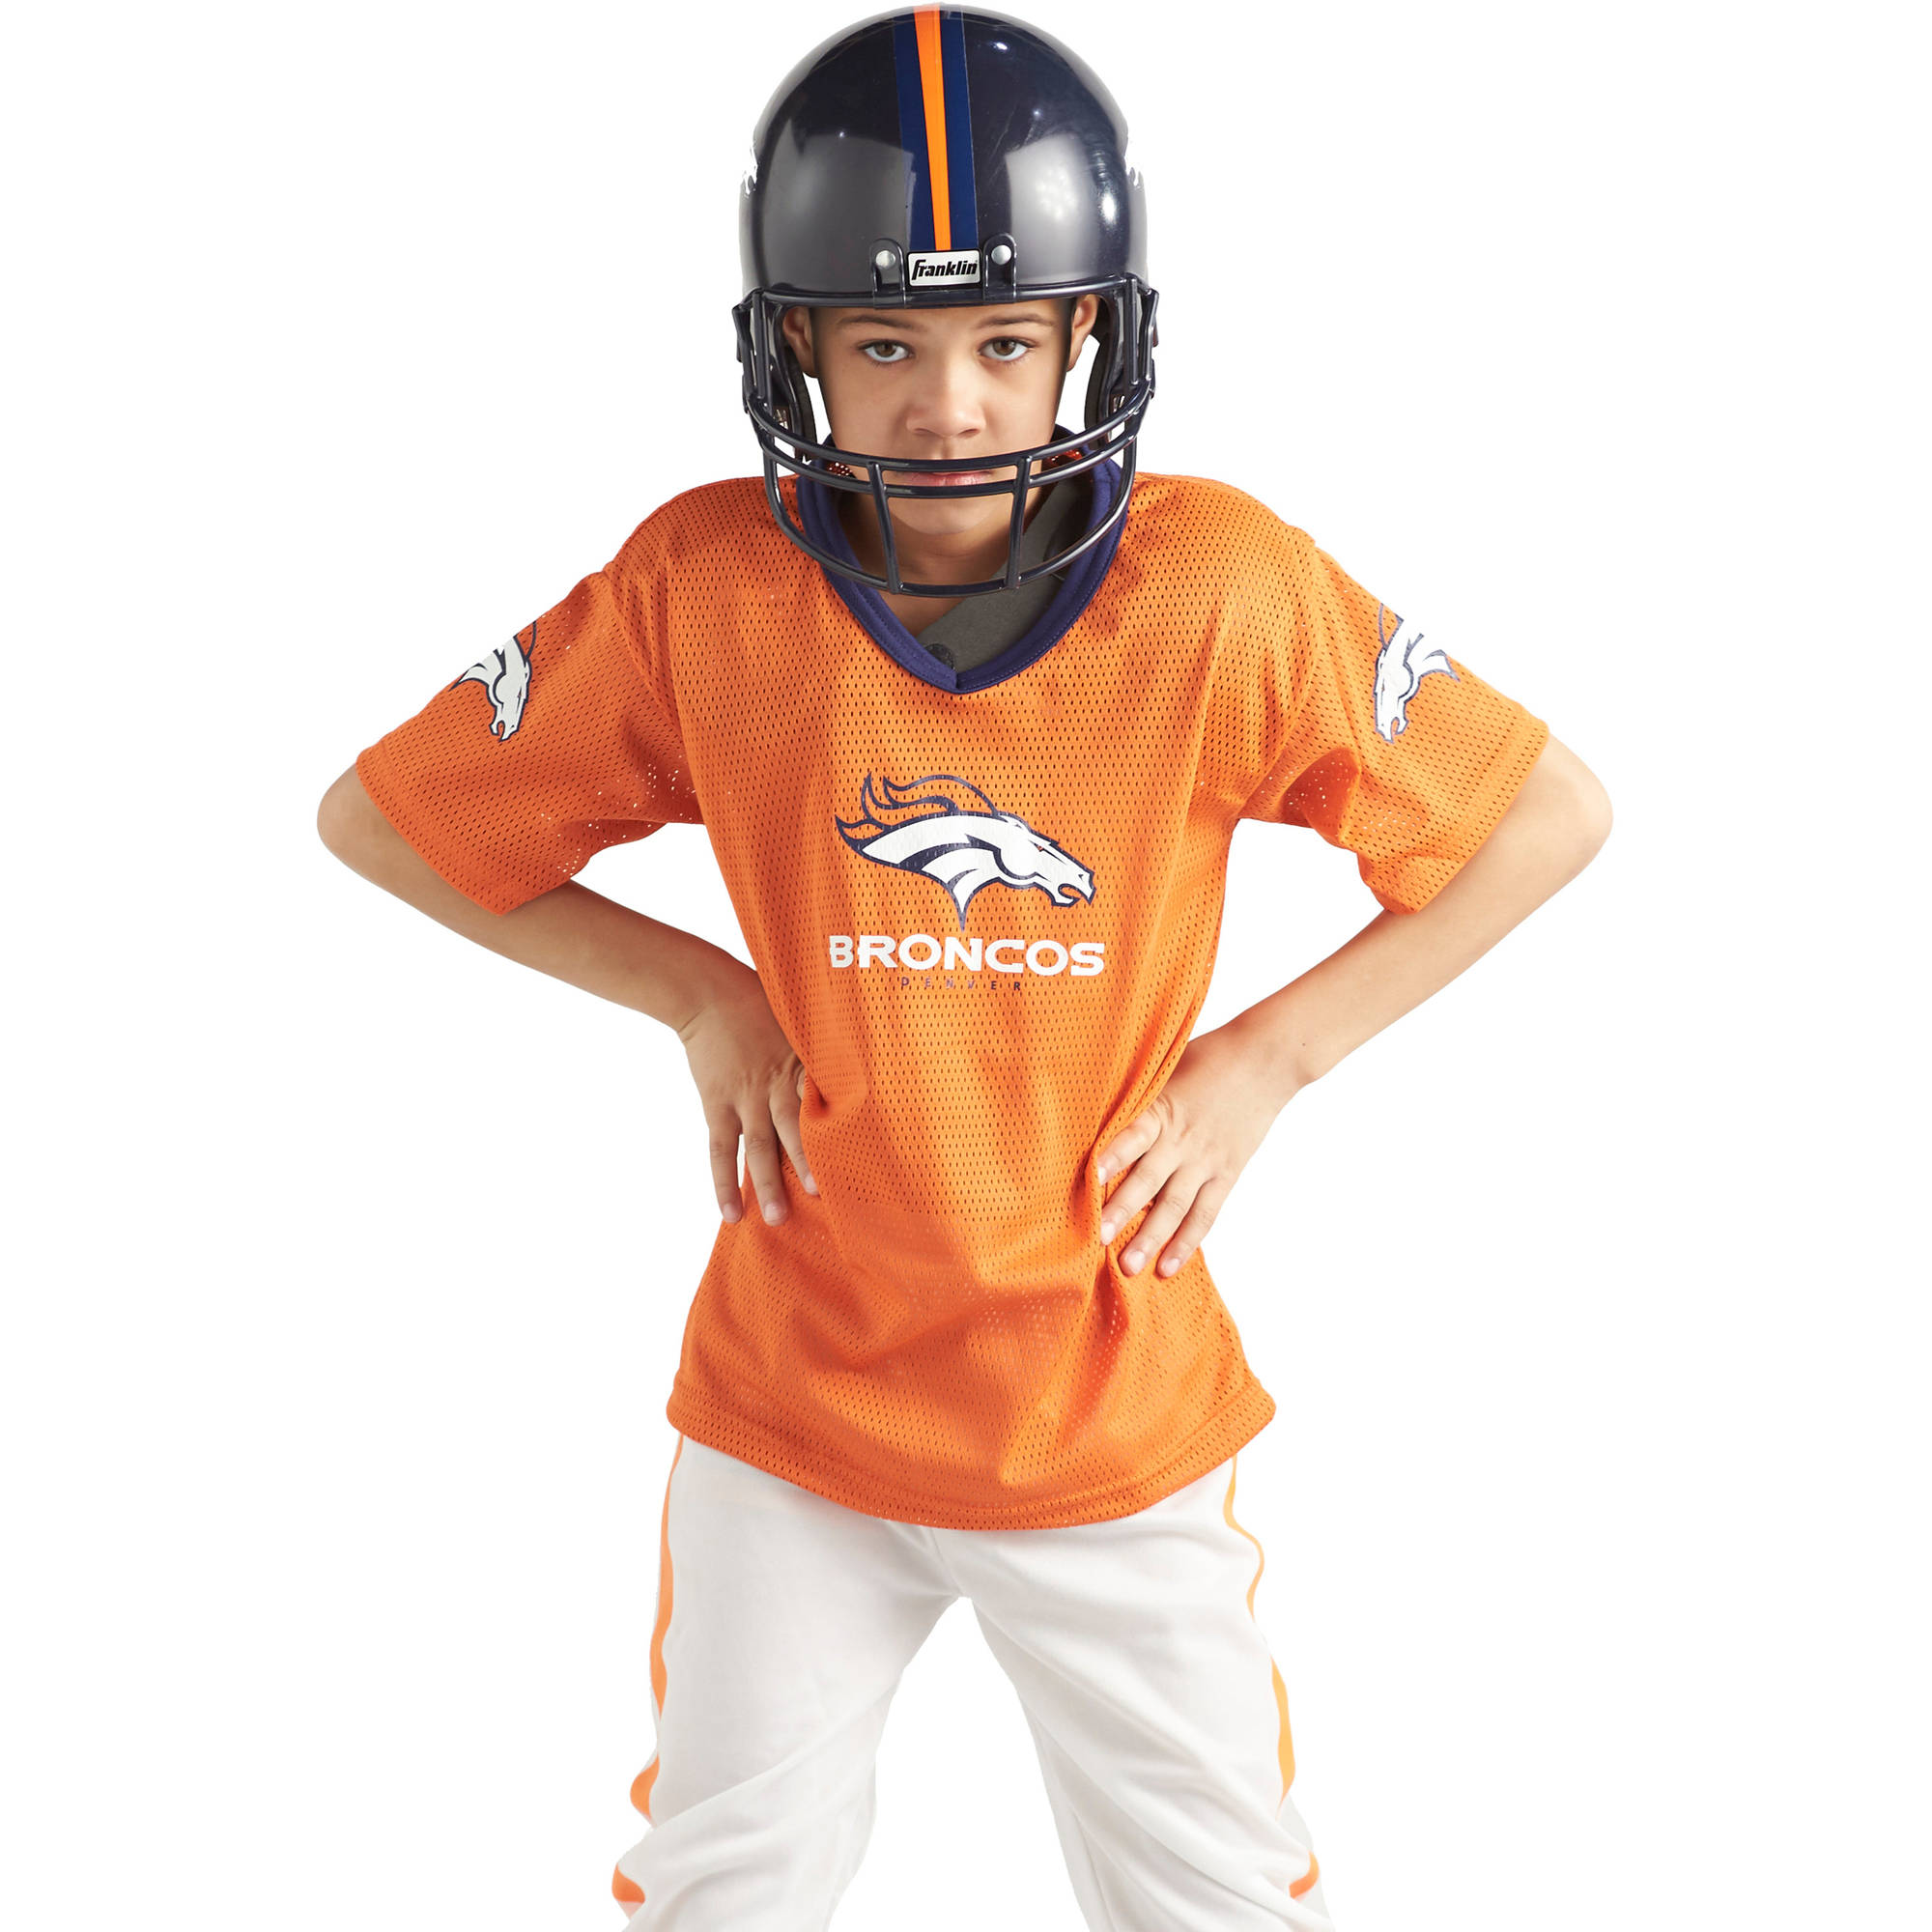 Franklin Sports NFL Youth Deluxe Uniform/Costume Football Set (Choose Team and Size) - image 3 of 5